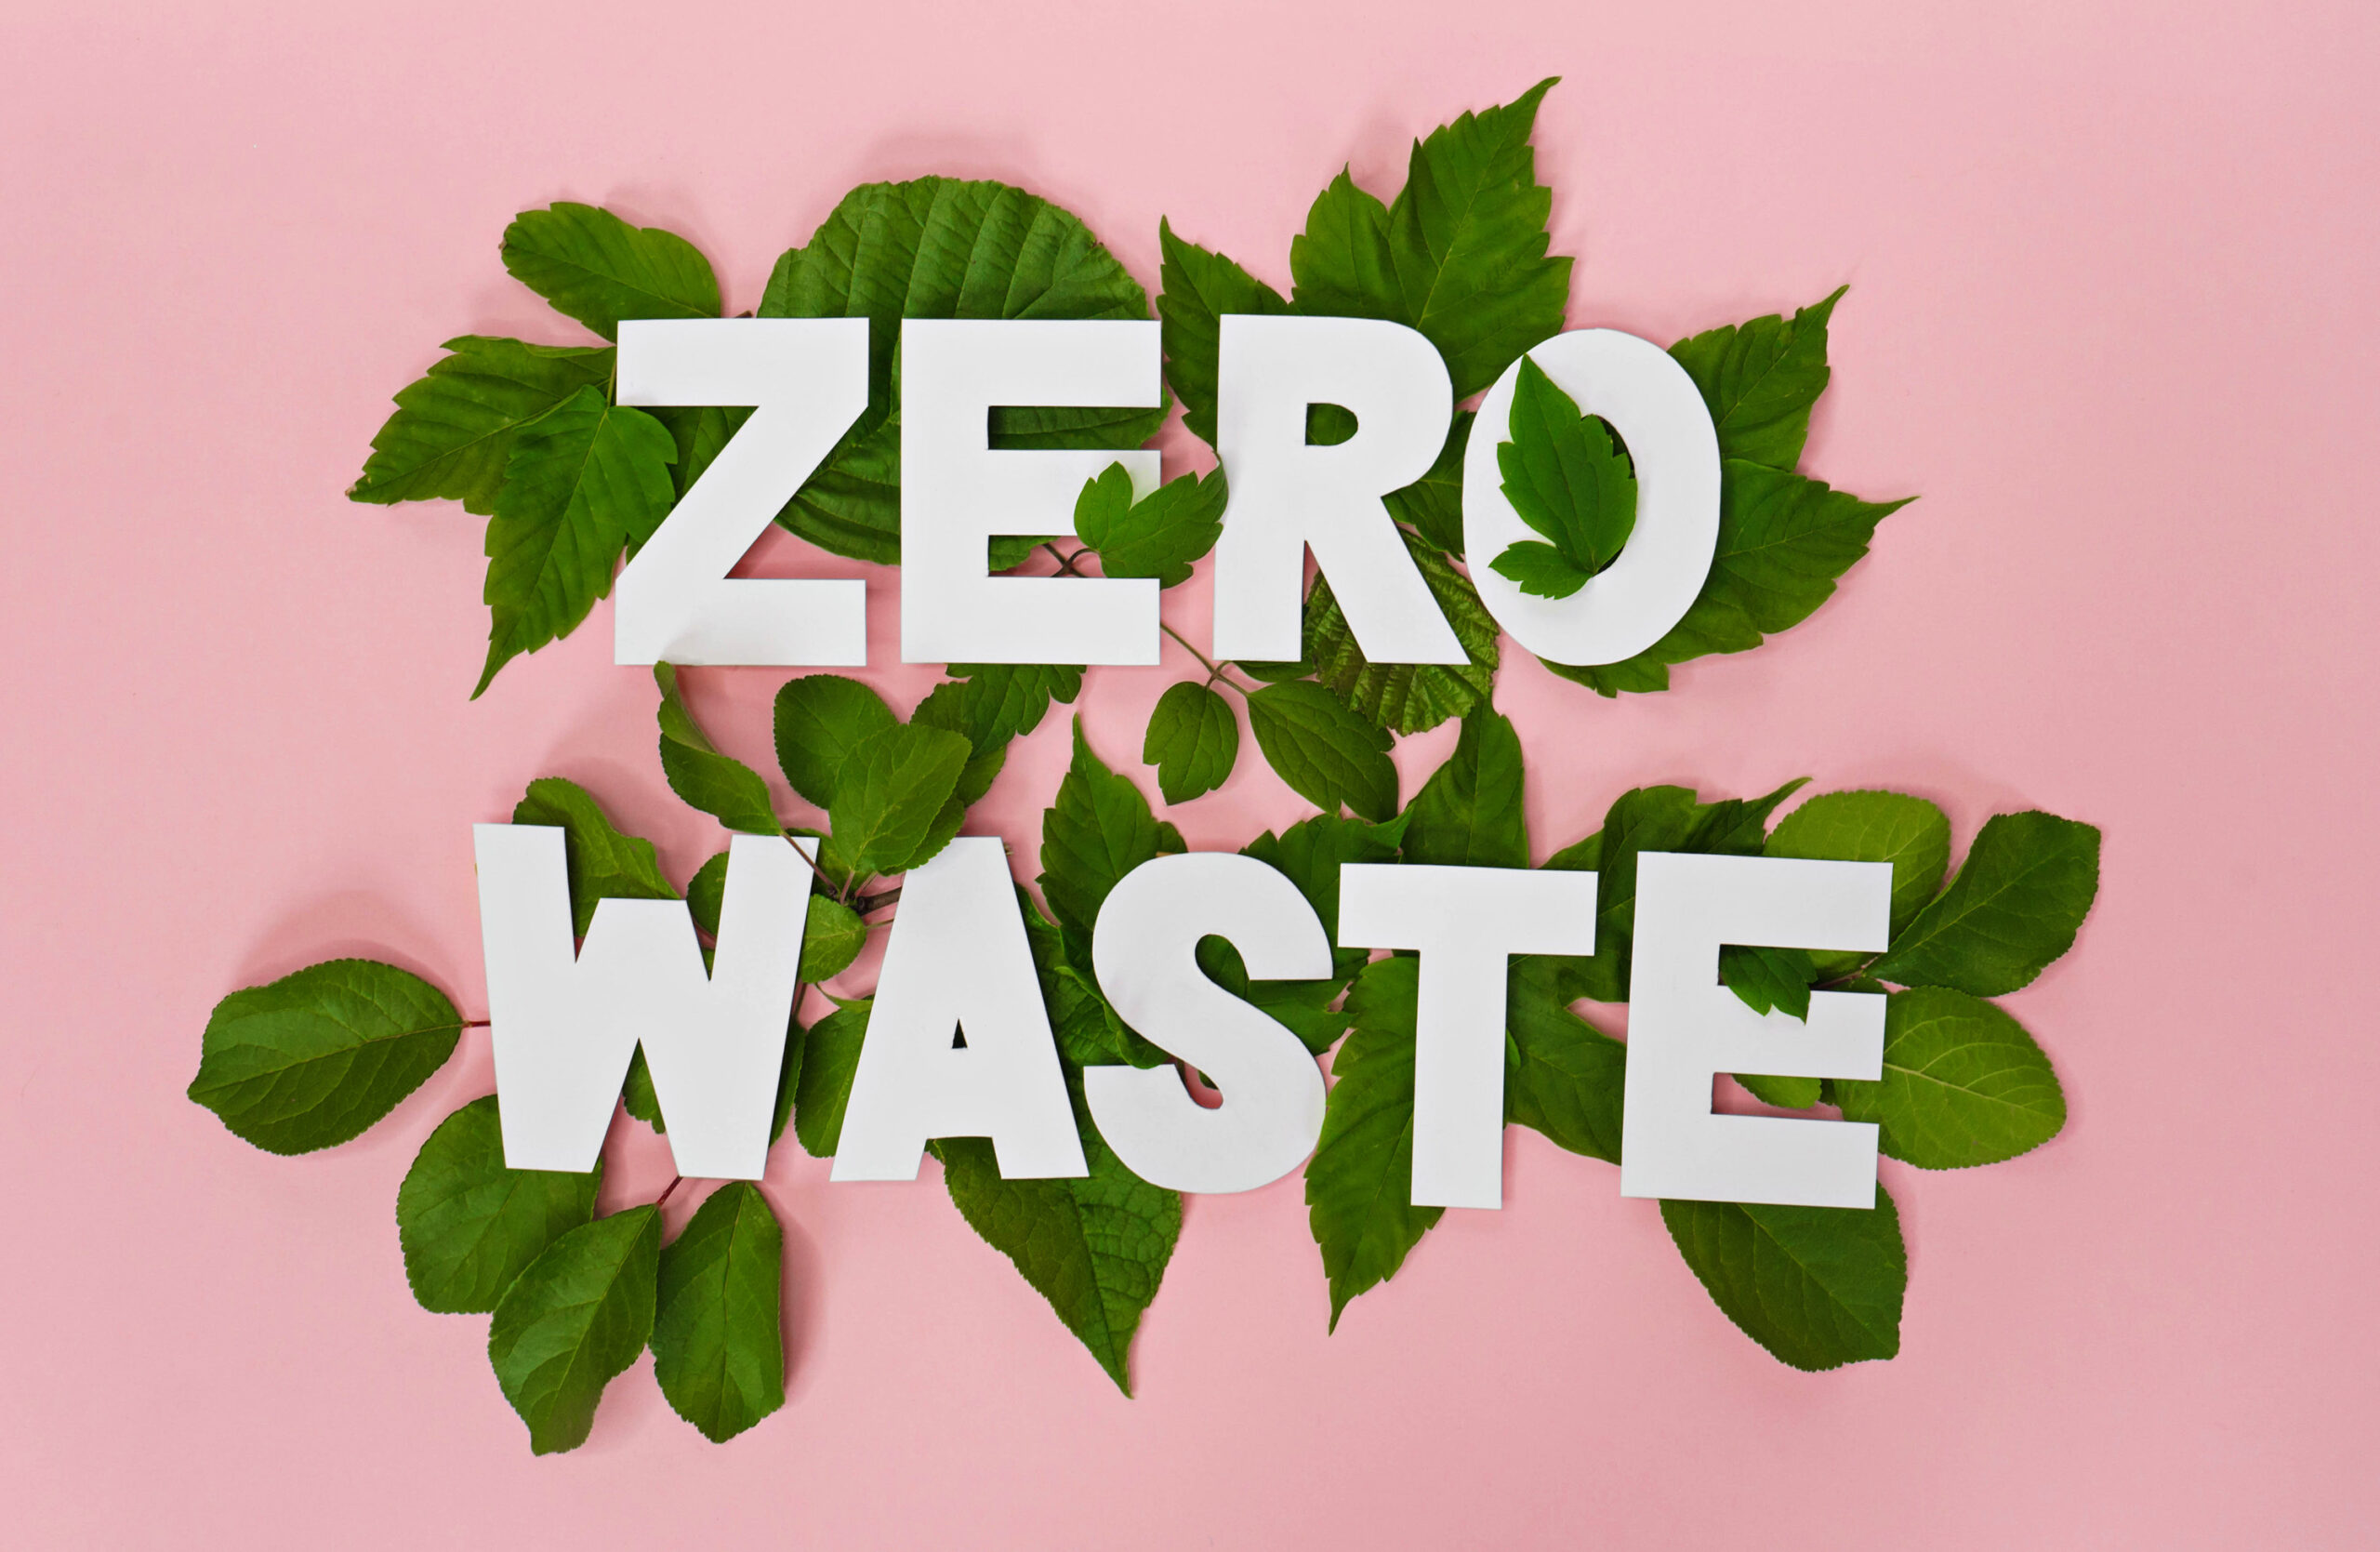 Geek insider, geekinsider, geekinsider. Com,, 7 sites with tips to help you go zero waste, living